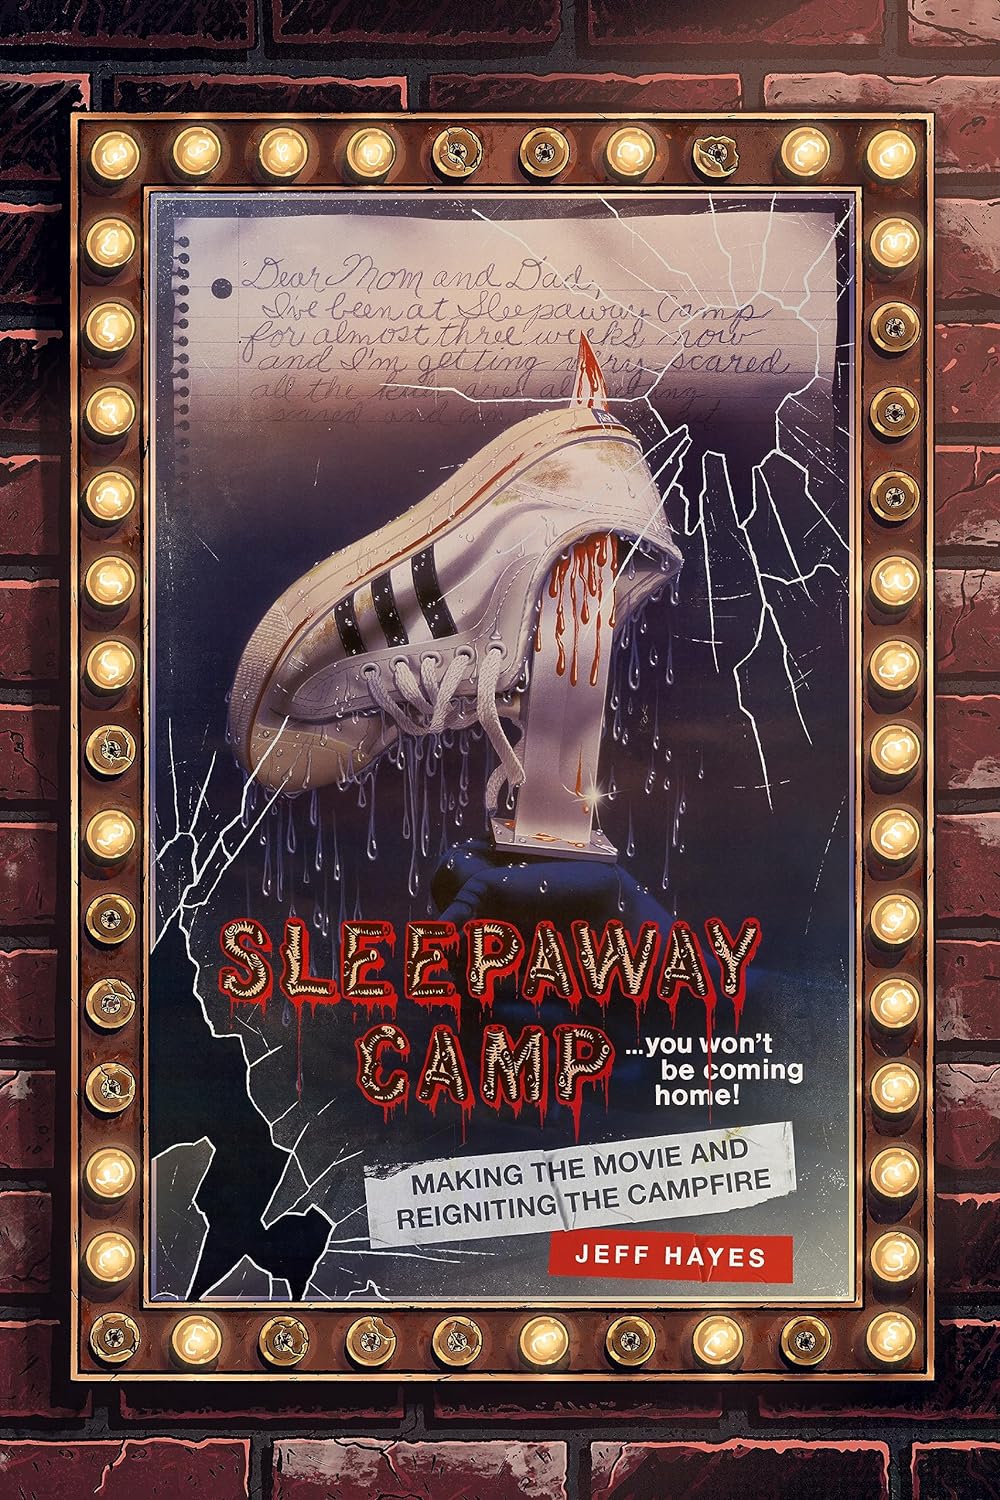 Jeff Hayes- Sleepaway Camp: Making The Movie And Reigniting The Campfire